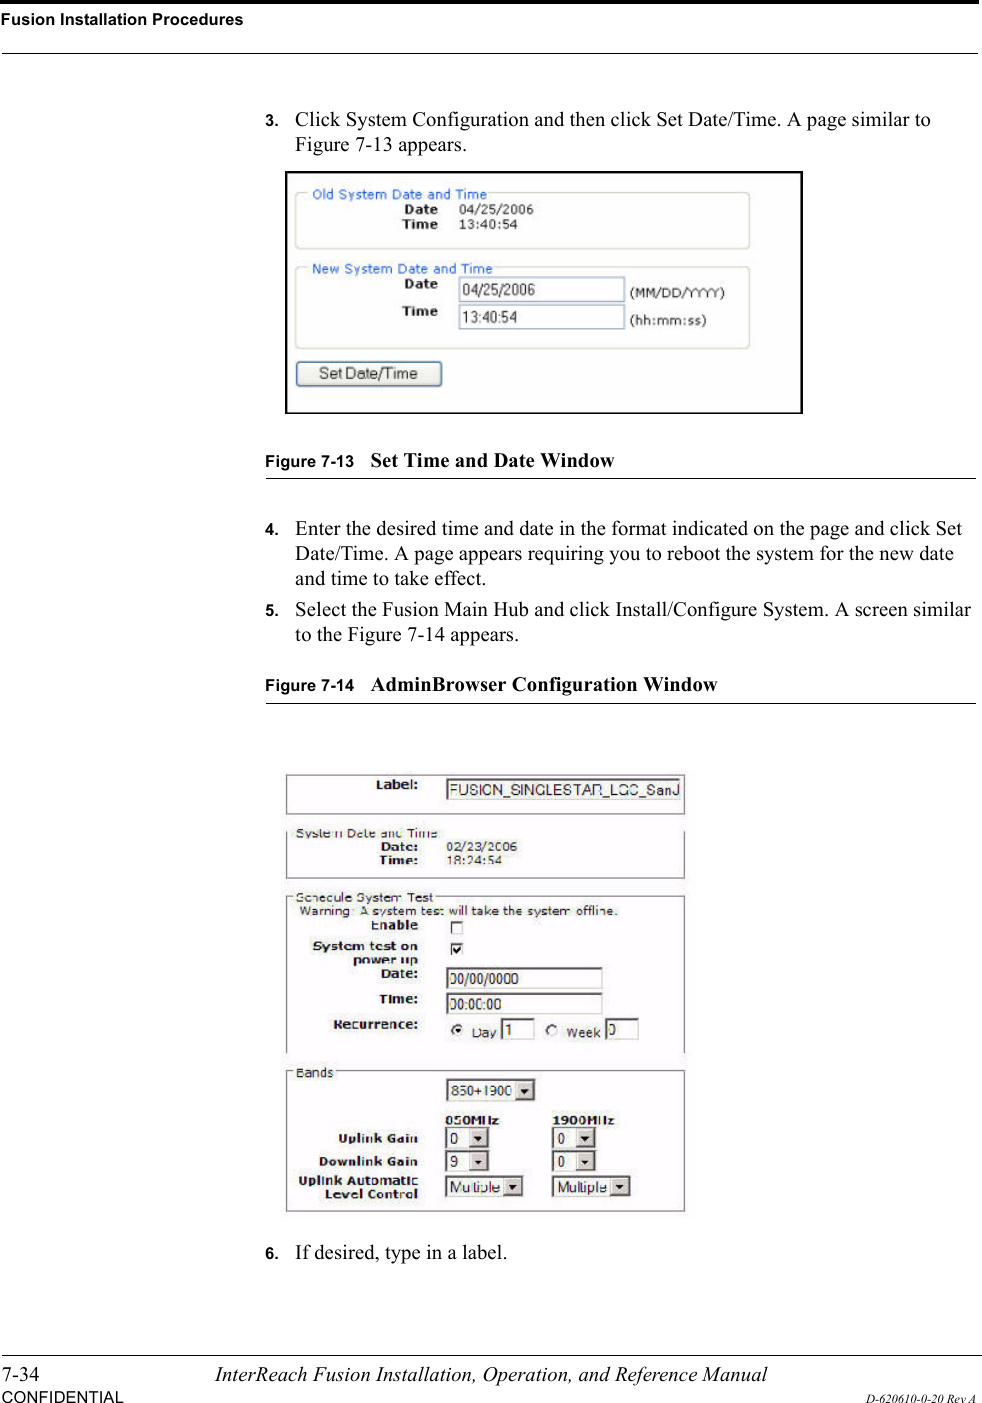 Fusion Installation Procedures7-34 InterReach Fusion Installation, Operation, and Reference ManualCONFIDENTIALD-620610-0-20 Rev A3.Click System Configuration and then click Set Date/Time. A page similar to Figure 7-13 appears.Figure 7-13Set Time and Date Window4.Enter the desired time and date in the format indicated on the page and click Set Date/Time. A page appears requiring you to reboot the system for the new date and time to take effect.5.Select the Fusion Main Hub and click Install/Configure System. A screen similar to the Figure 7-14 appears.Figure 7-14AdminBrowser Configuration Window6.If desired, type in a label.